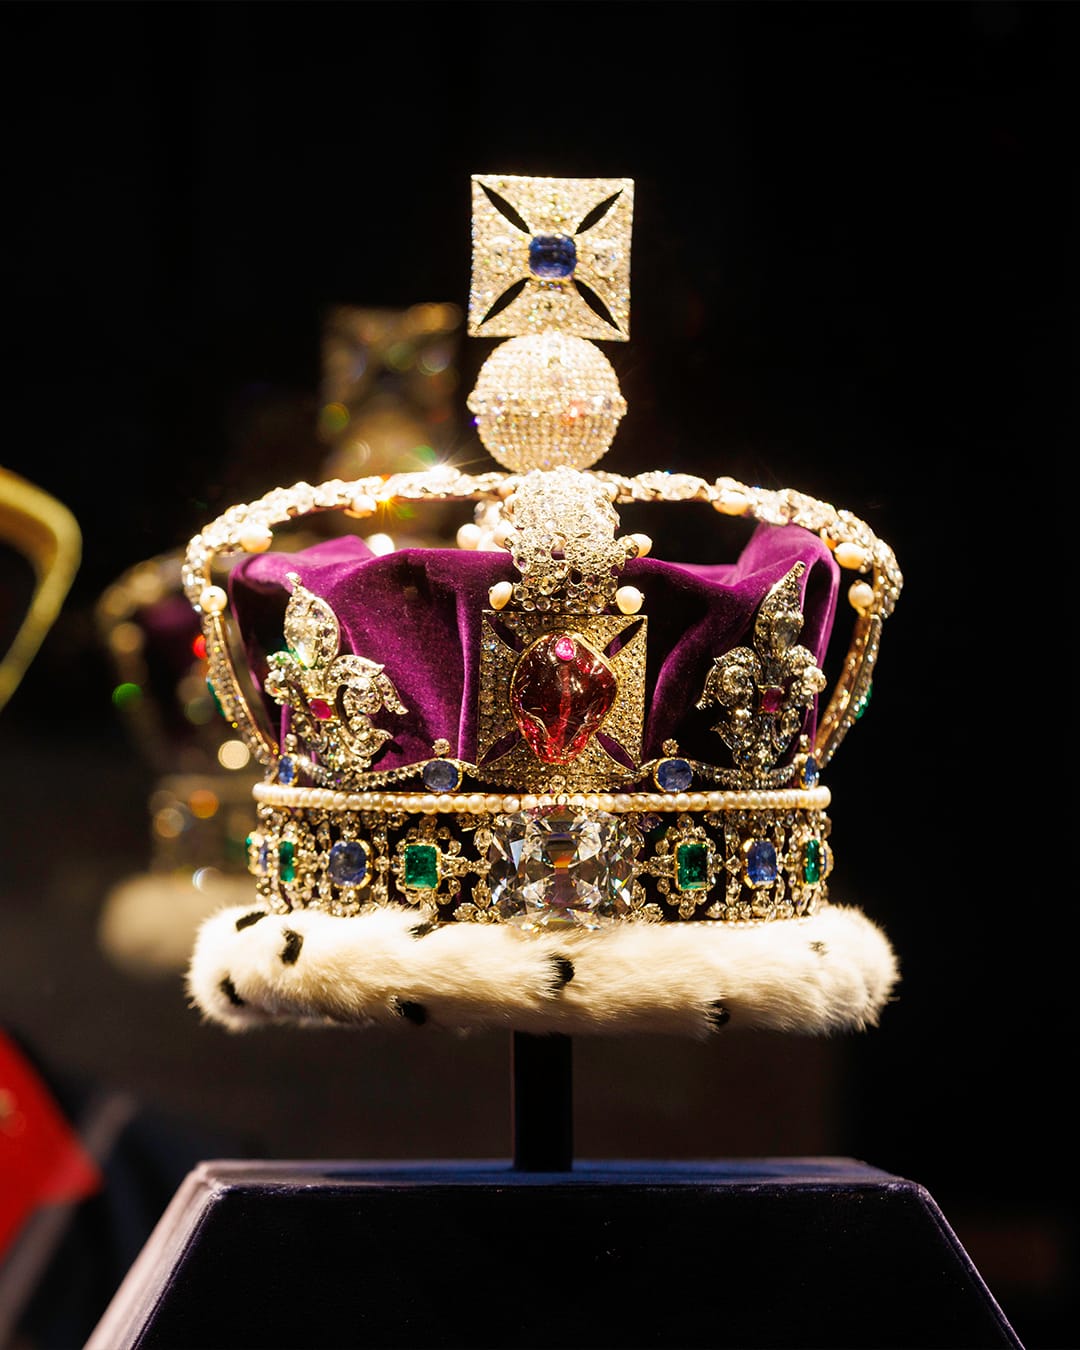 A picture containing crown jewels